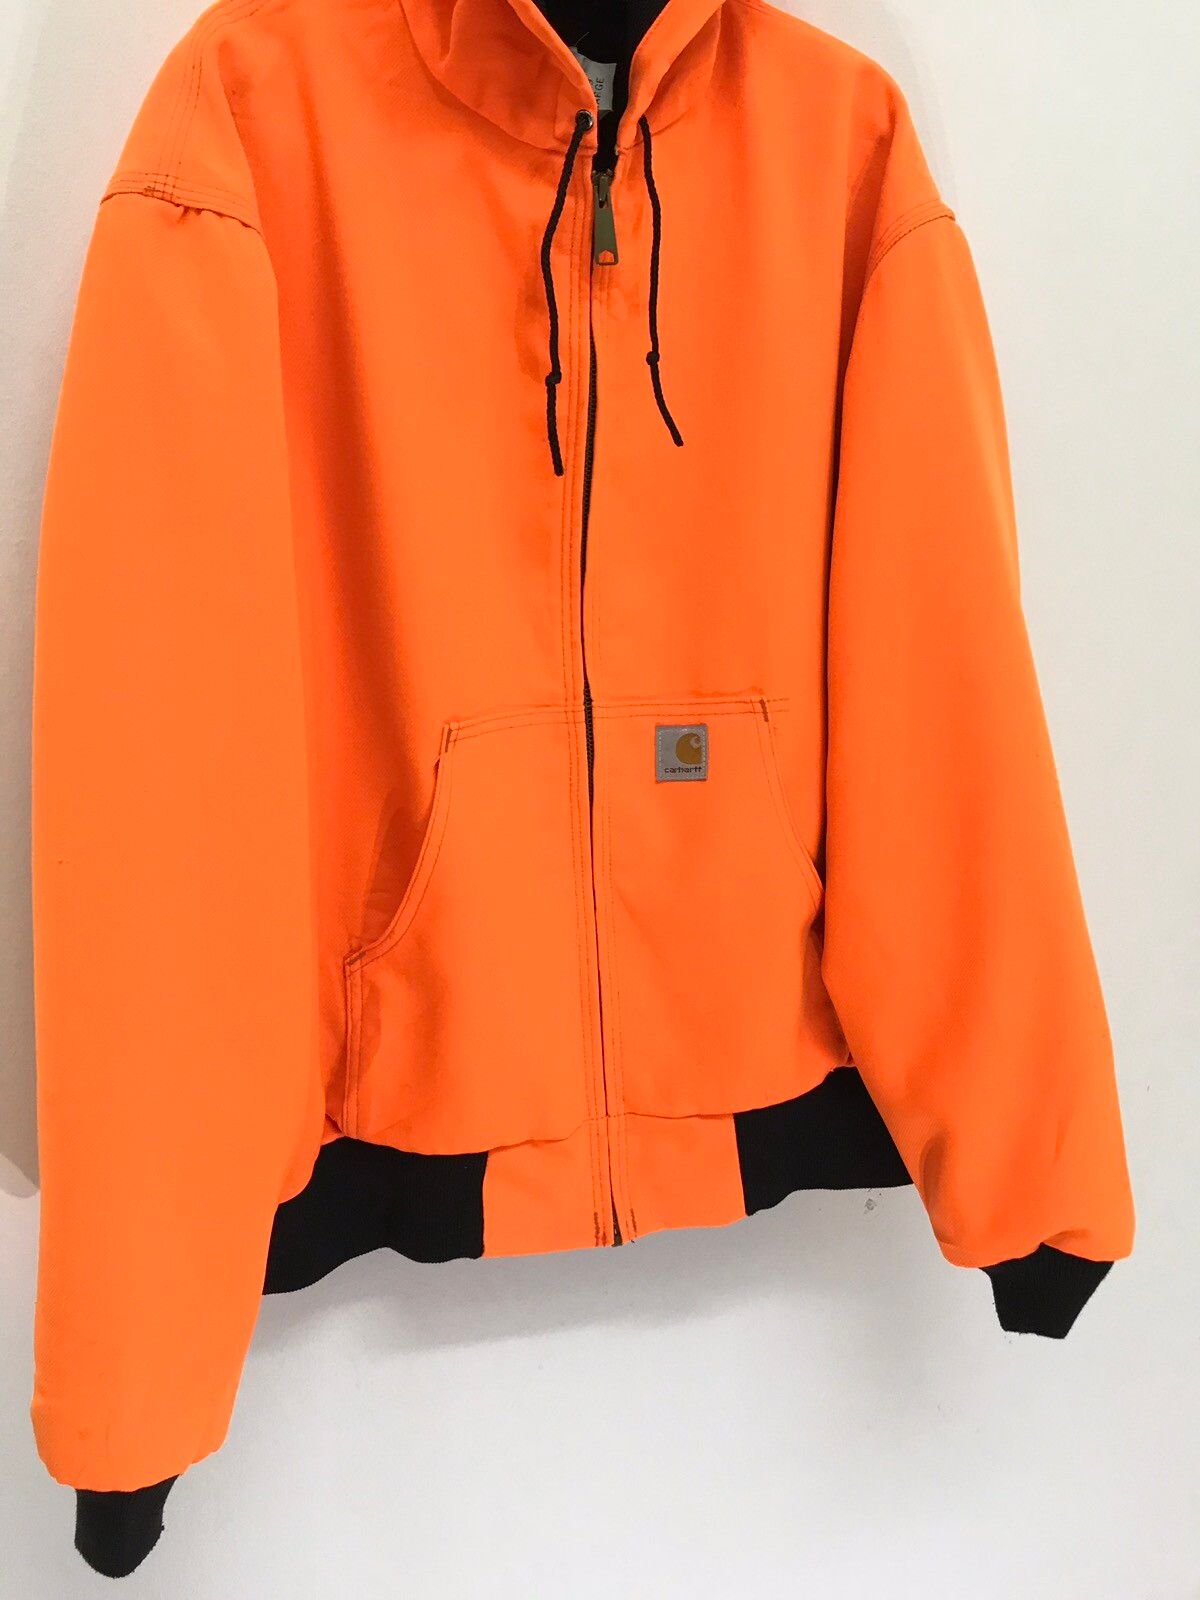 Carhartt Made in USA Carhartt Jacket Neon Orange Very Bright Colour Size US XL / EU 56 / 4 - 2 Preview